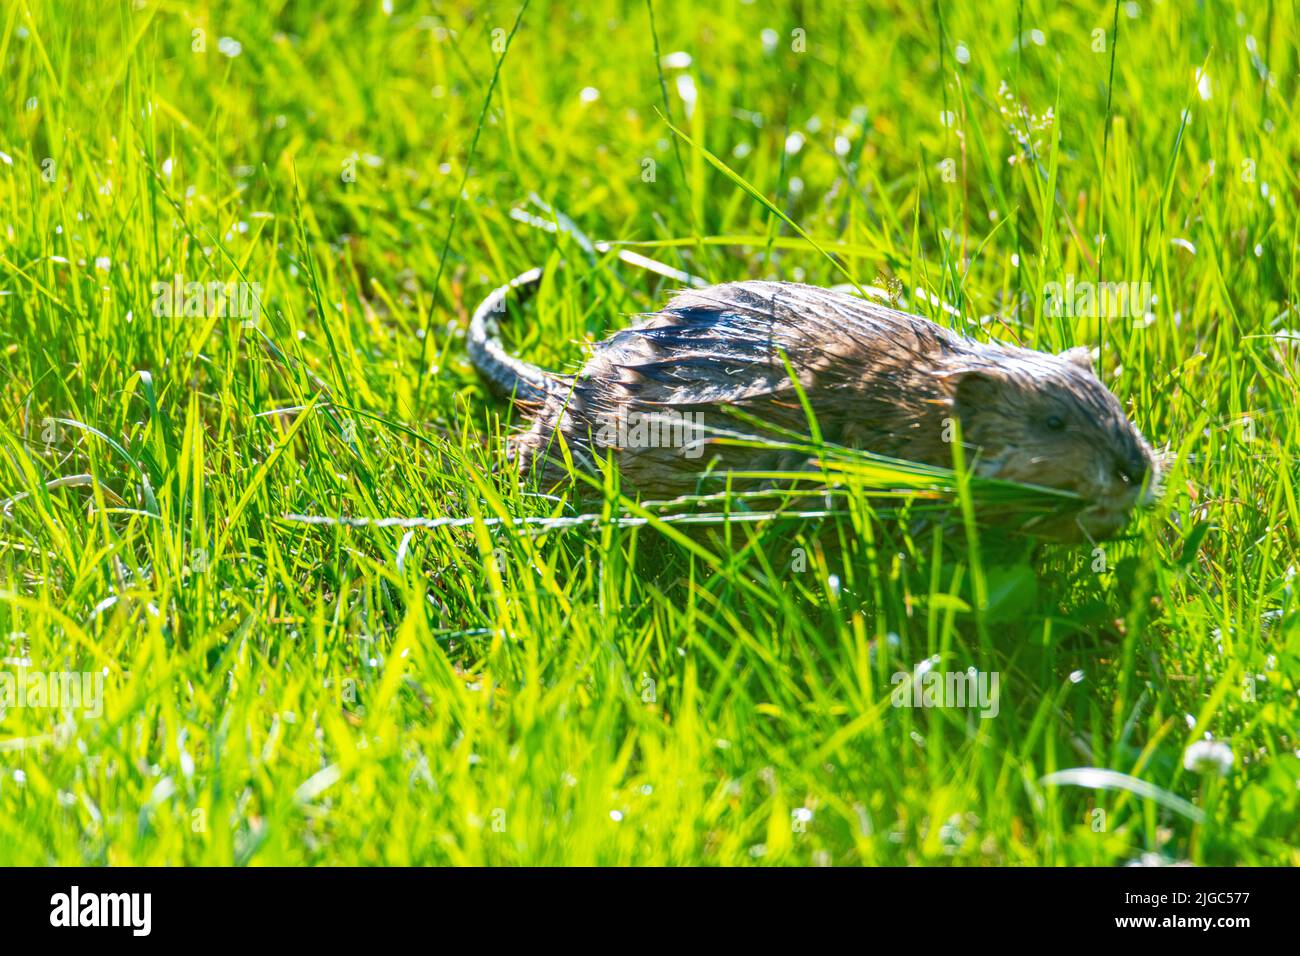 A  muskrat in a green field in the middle of the sun, looking for food Stock Photo